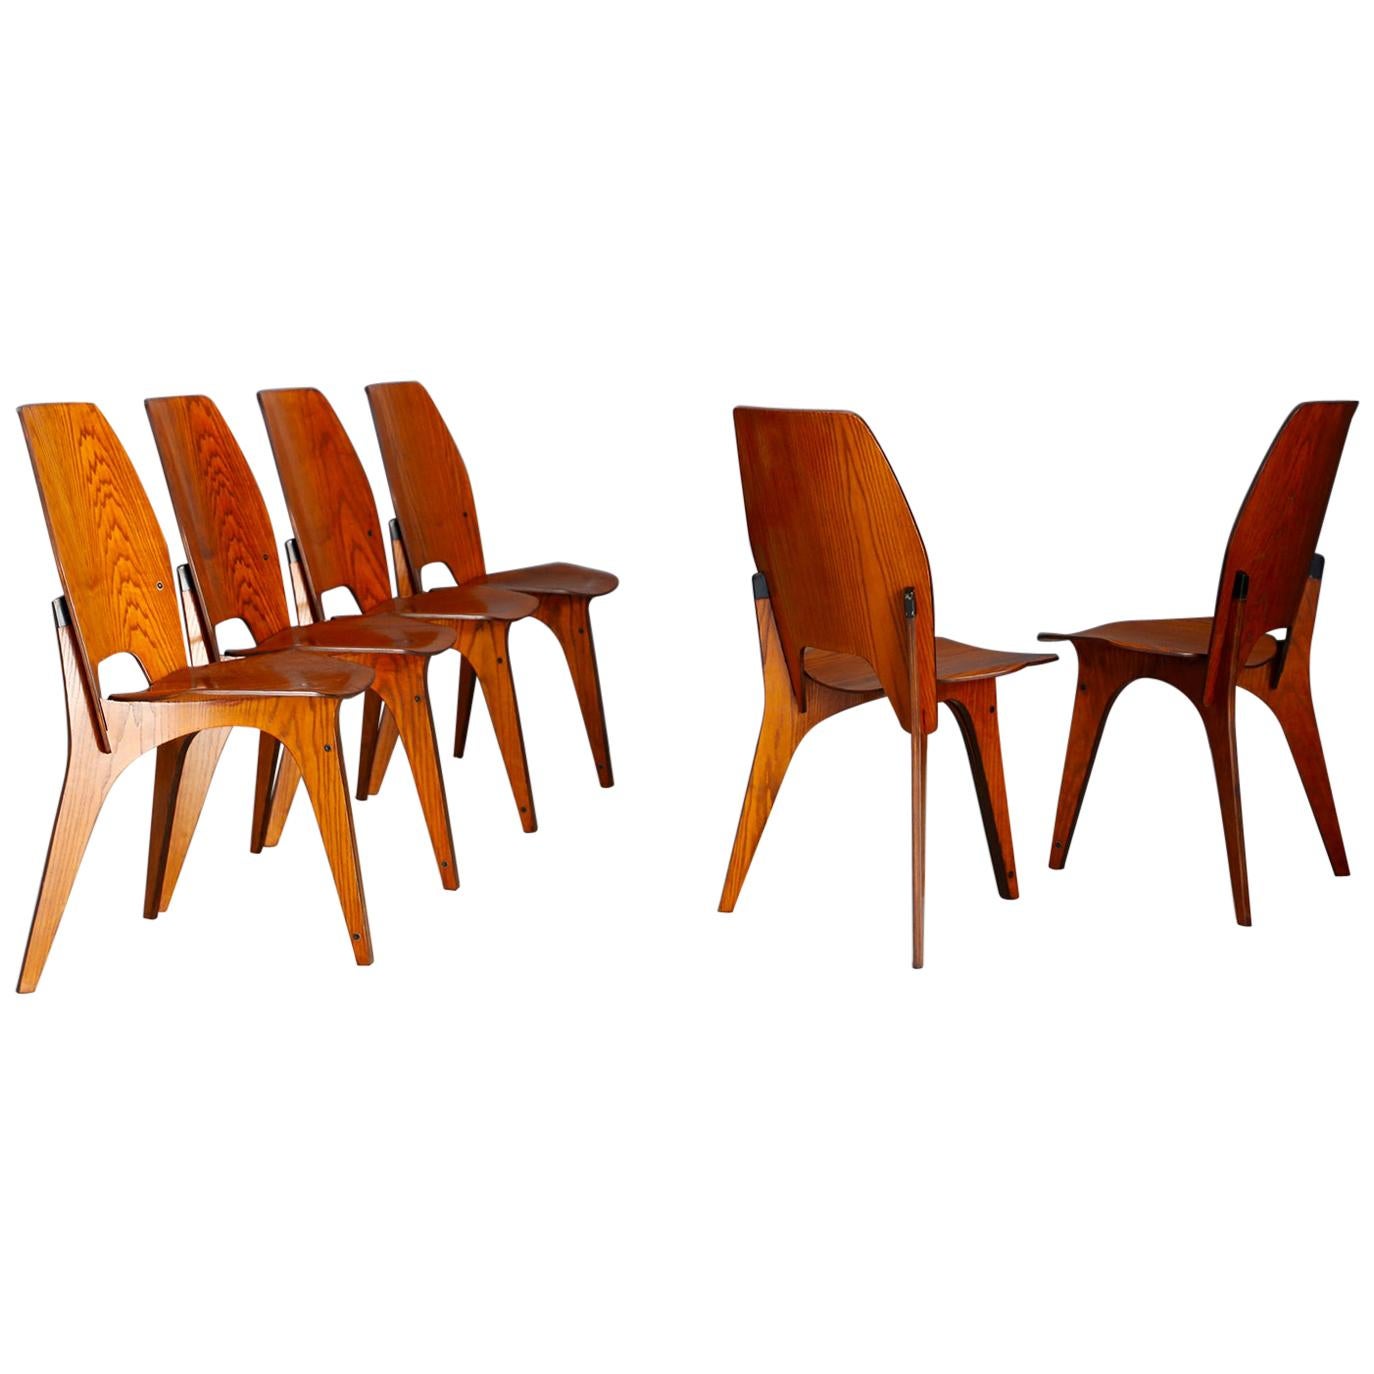 Set of Six Midcentury Chairs by Eugenio Gerli for Tecno, Published, 1958